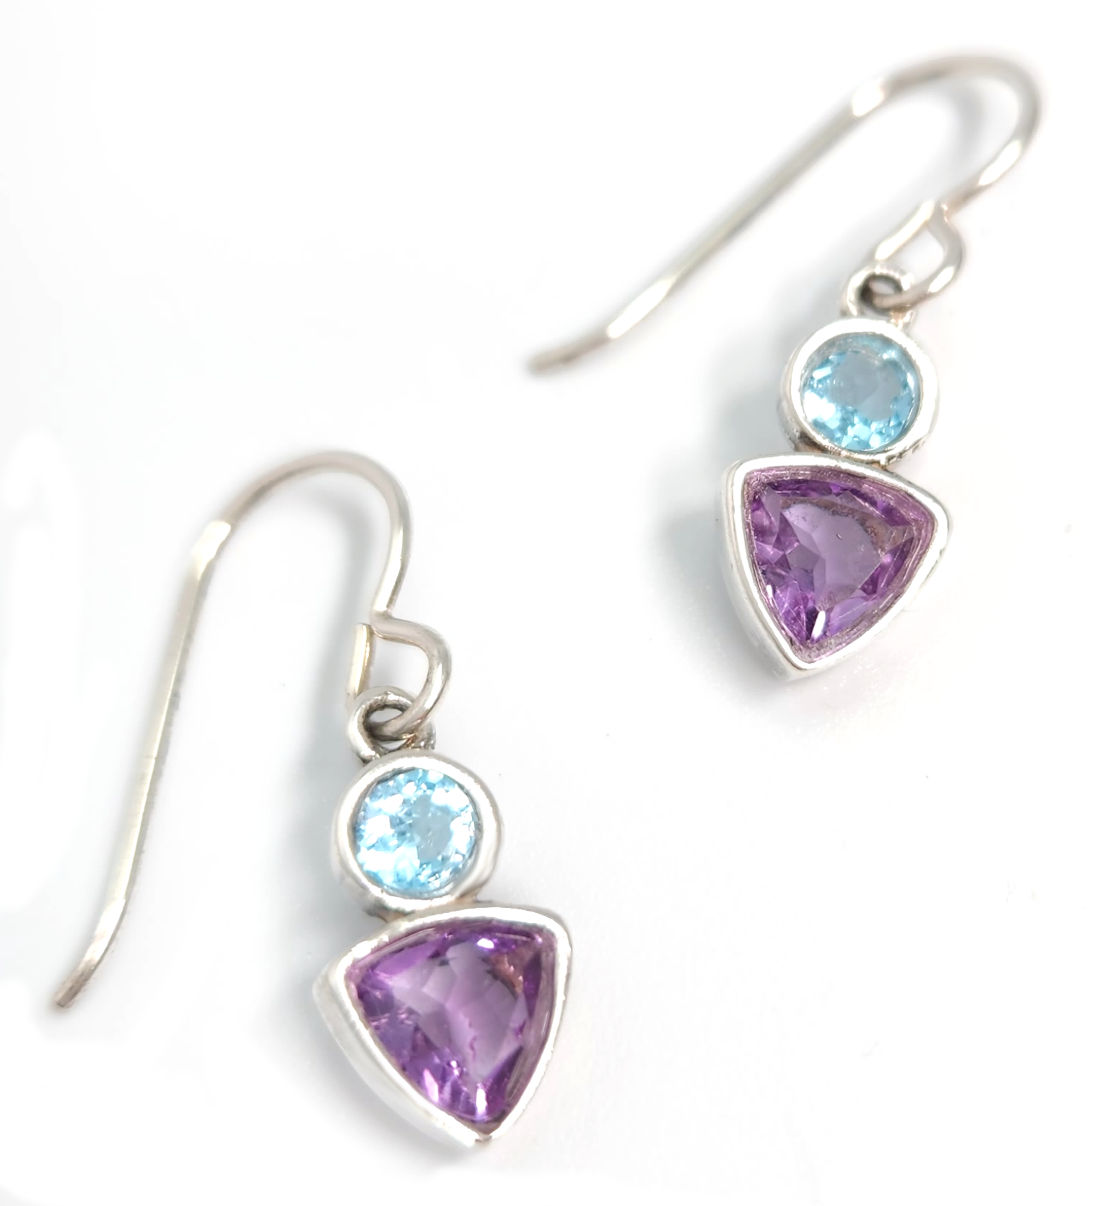 blue topaz, amethyst, and sterling silver earrings handmade by Sonoma Artworks